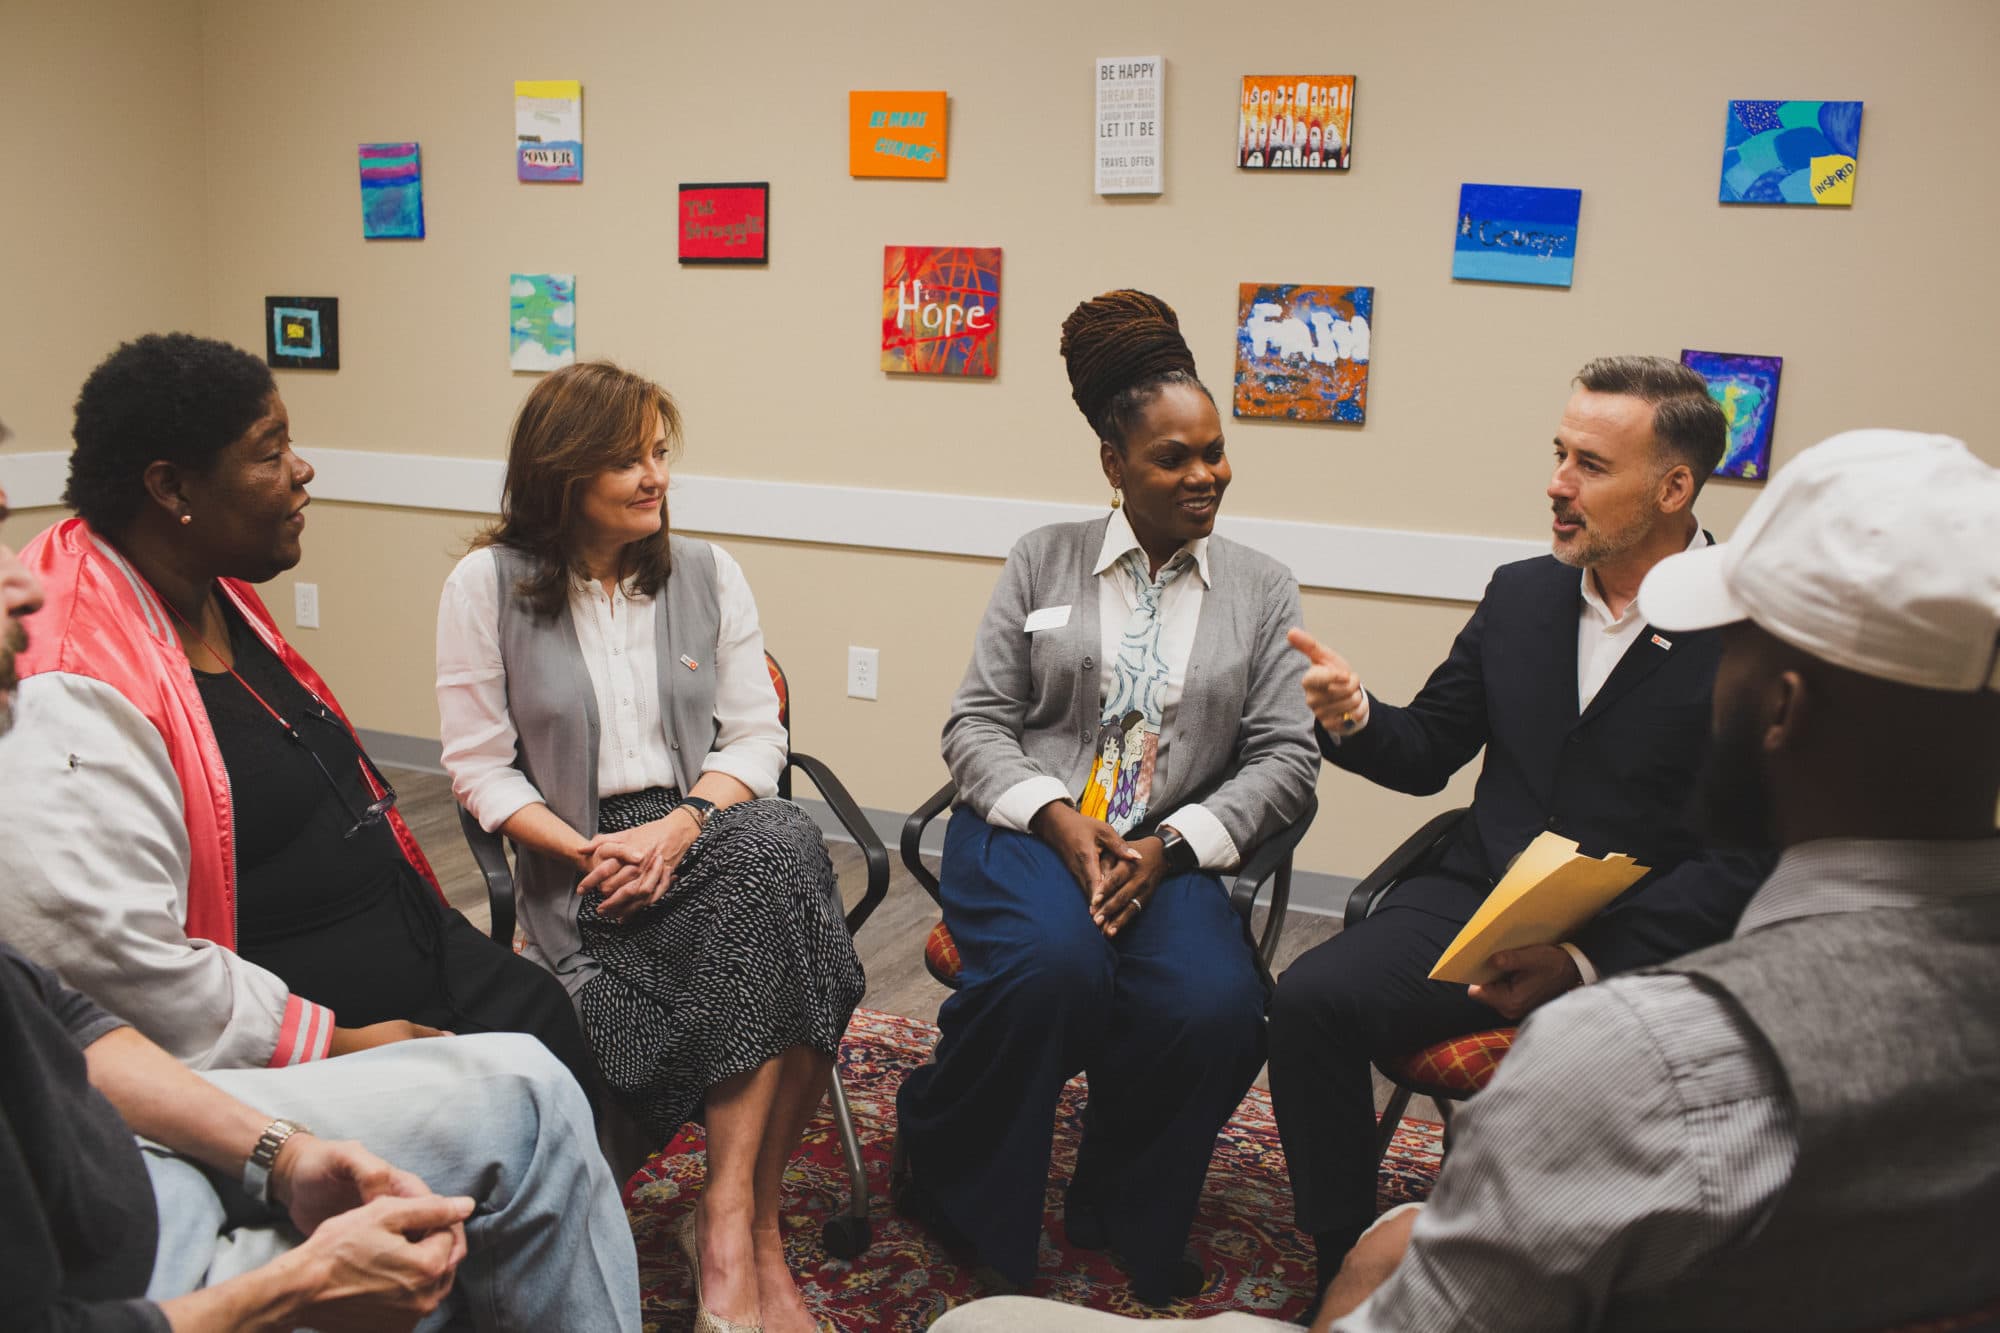 David Furnish and Anne Aslett visiting Positive Impact in Atlanta, a partner of the Foundation who shares our vision of ending AIDS in America.